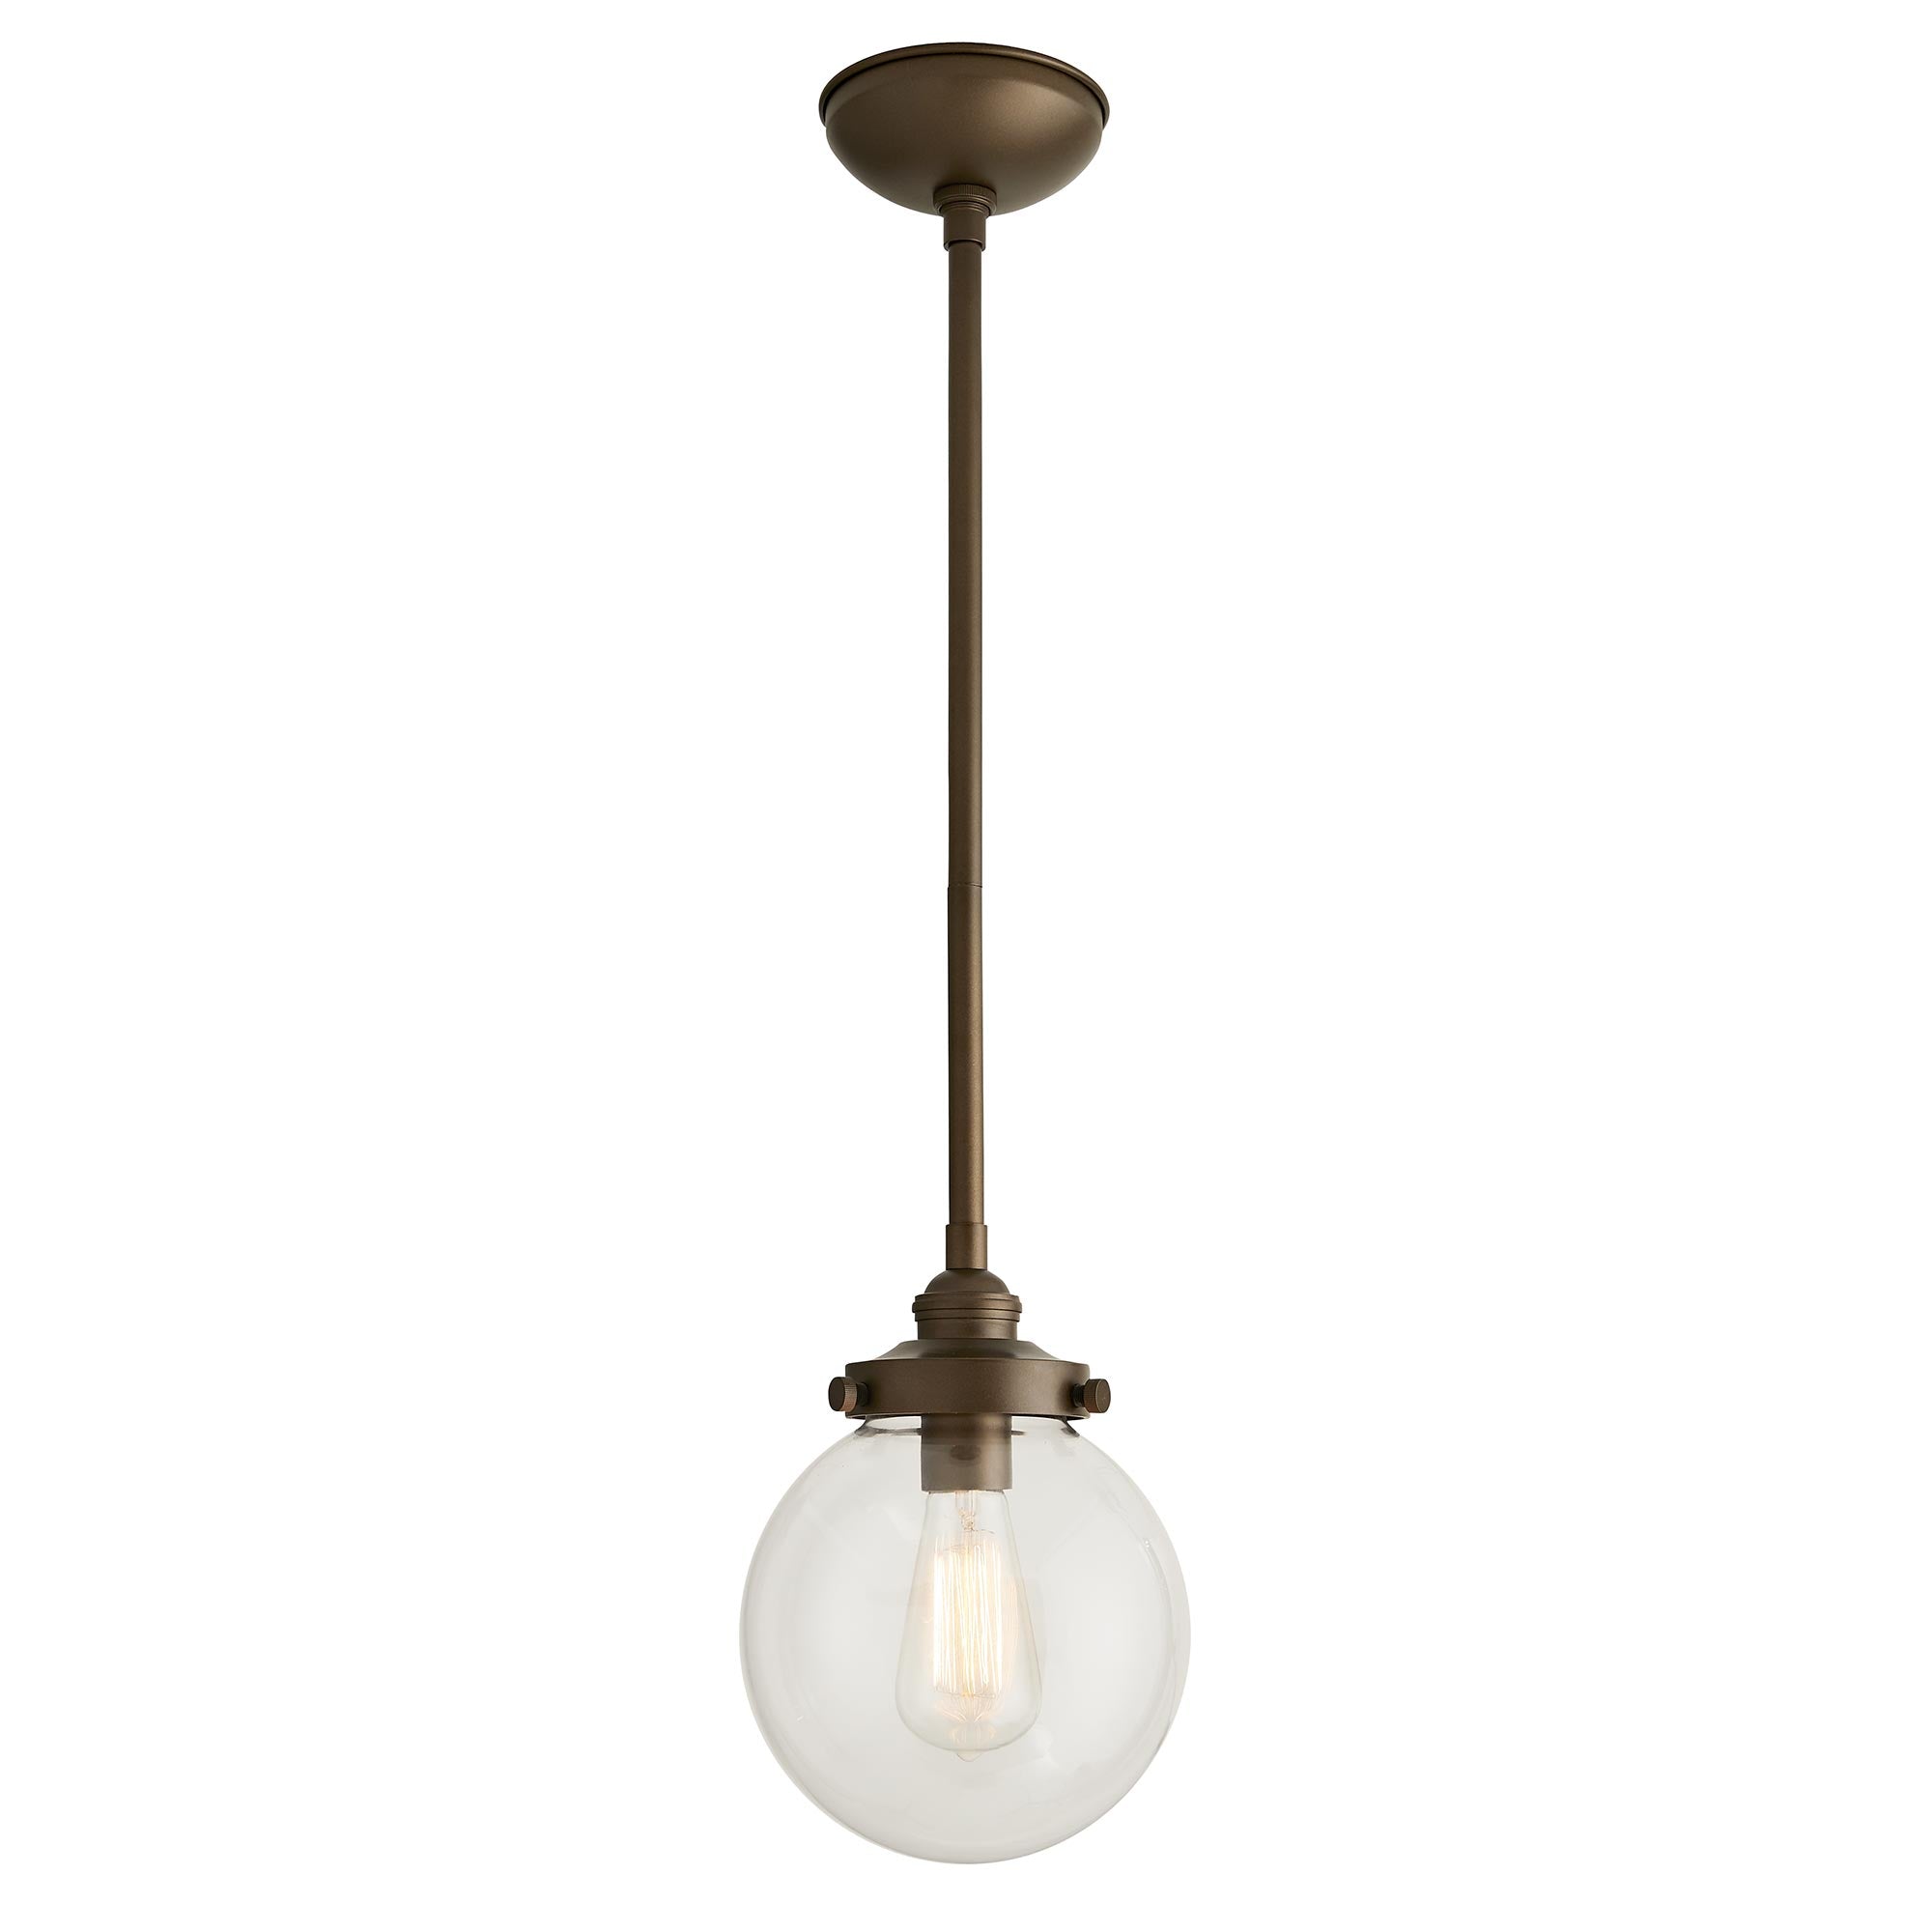 Reeves Small Outdoor Pendant